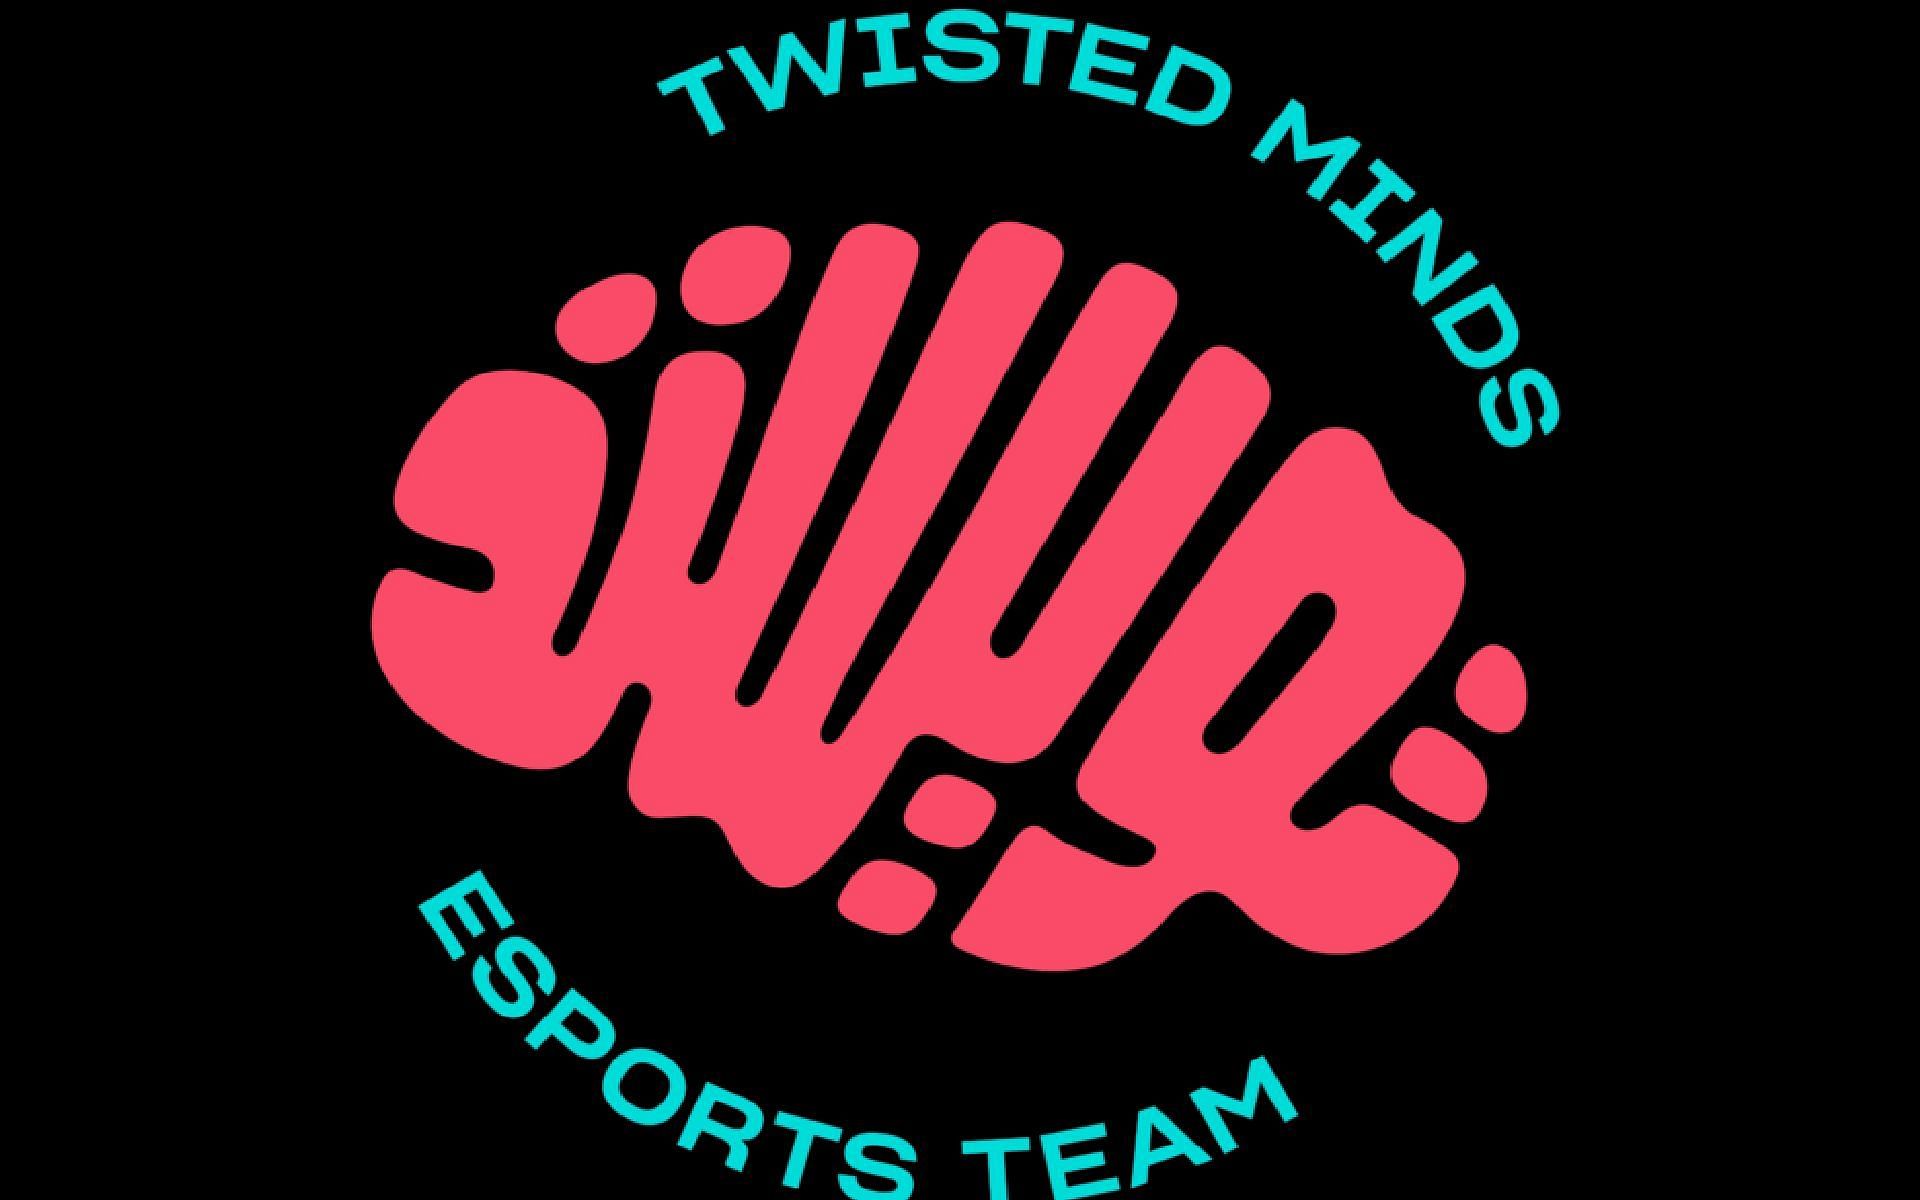 Twisted Minds is the only Saudi Arabian franchise invited to participate in the tournament (Image via Twisted Minds)